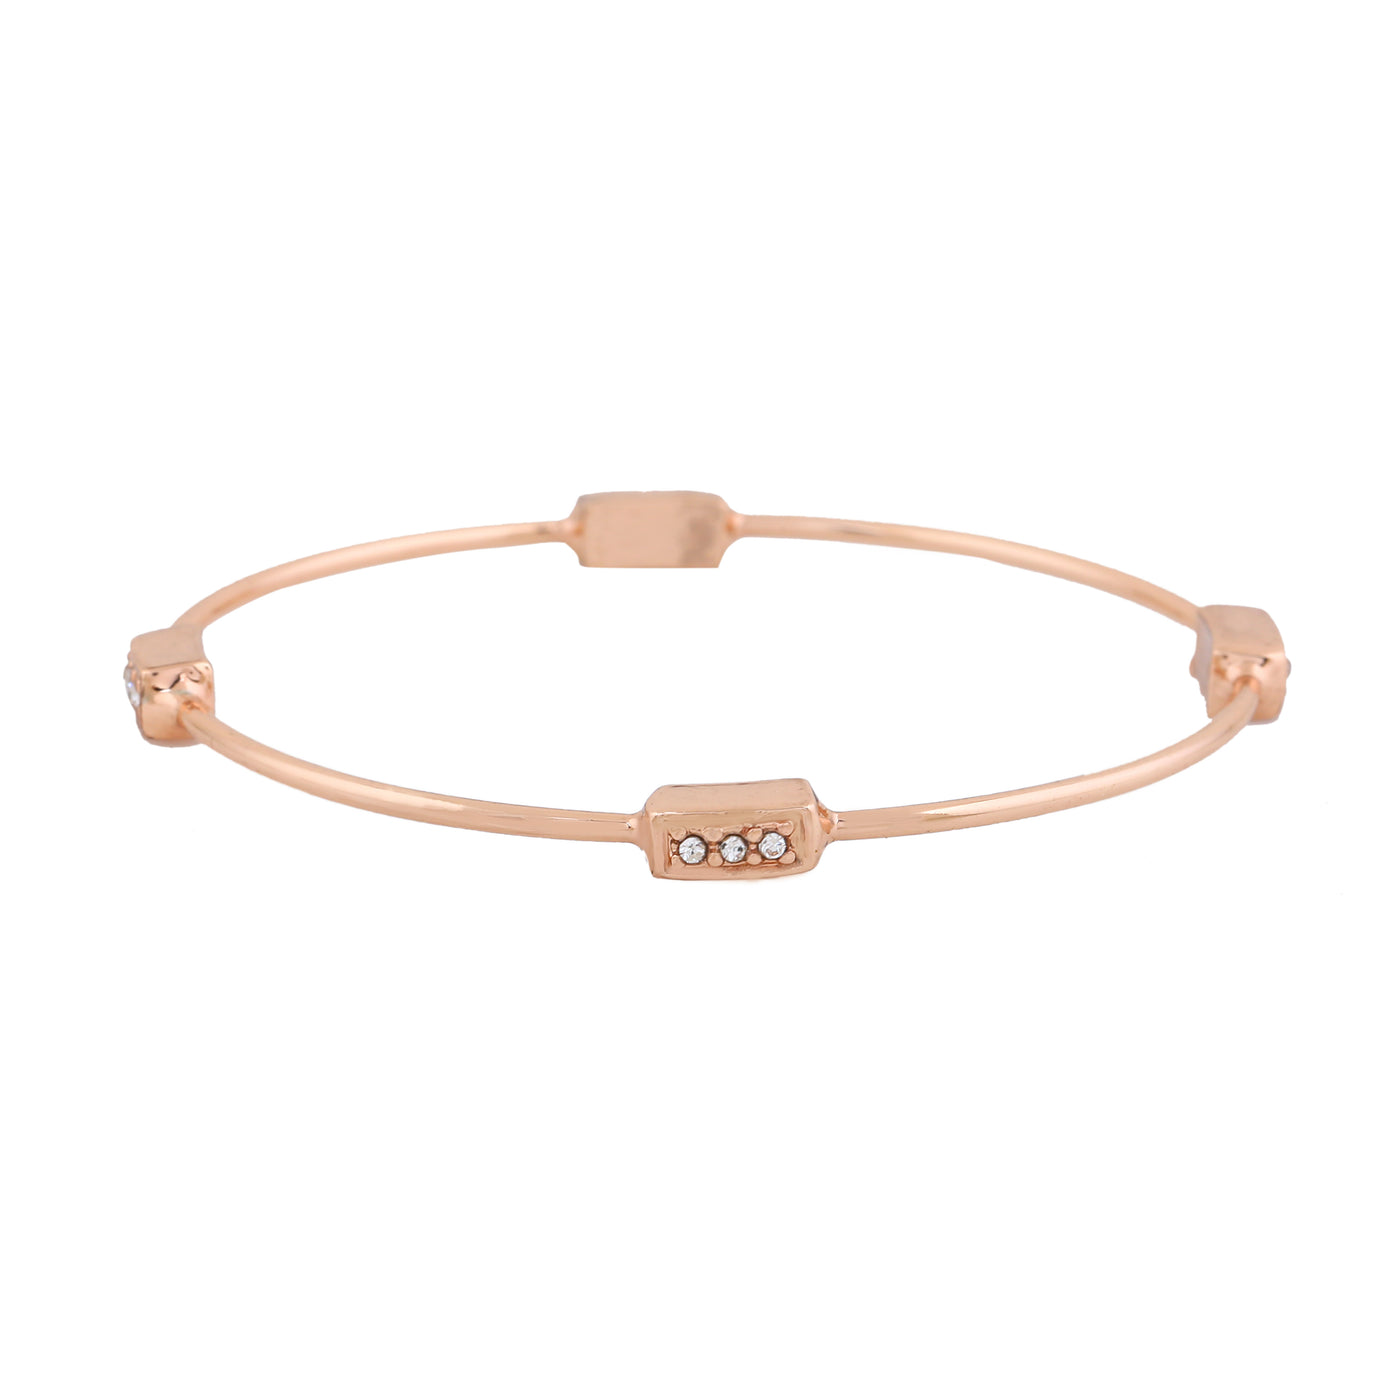 Estele Rose Gold Plated Classic Bangle Bracelet with White Crystals for Women